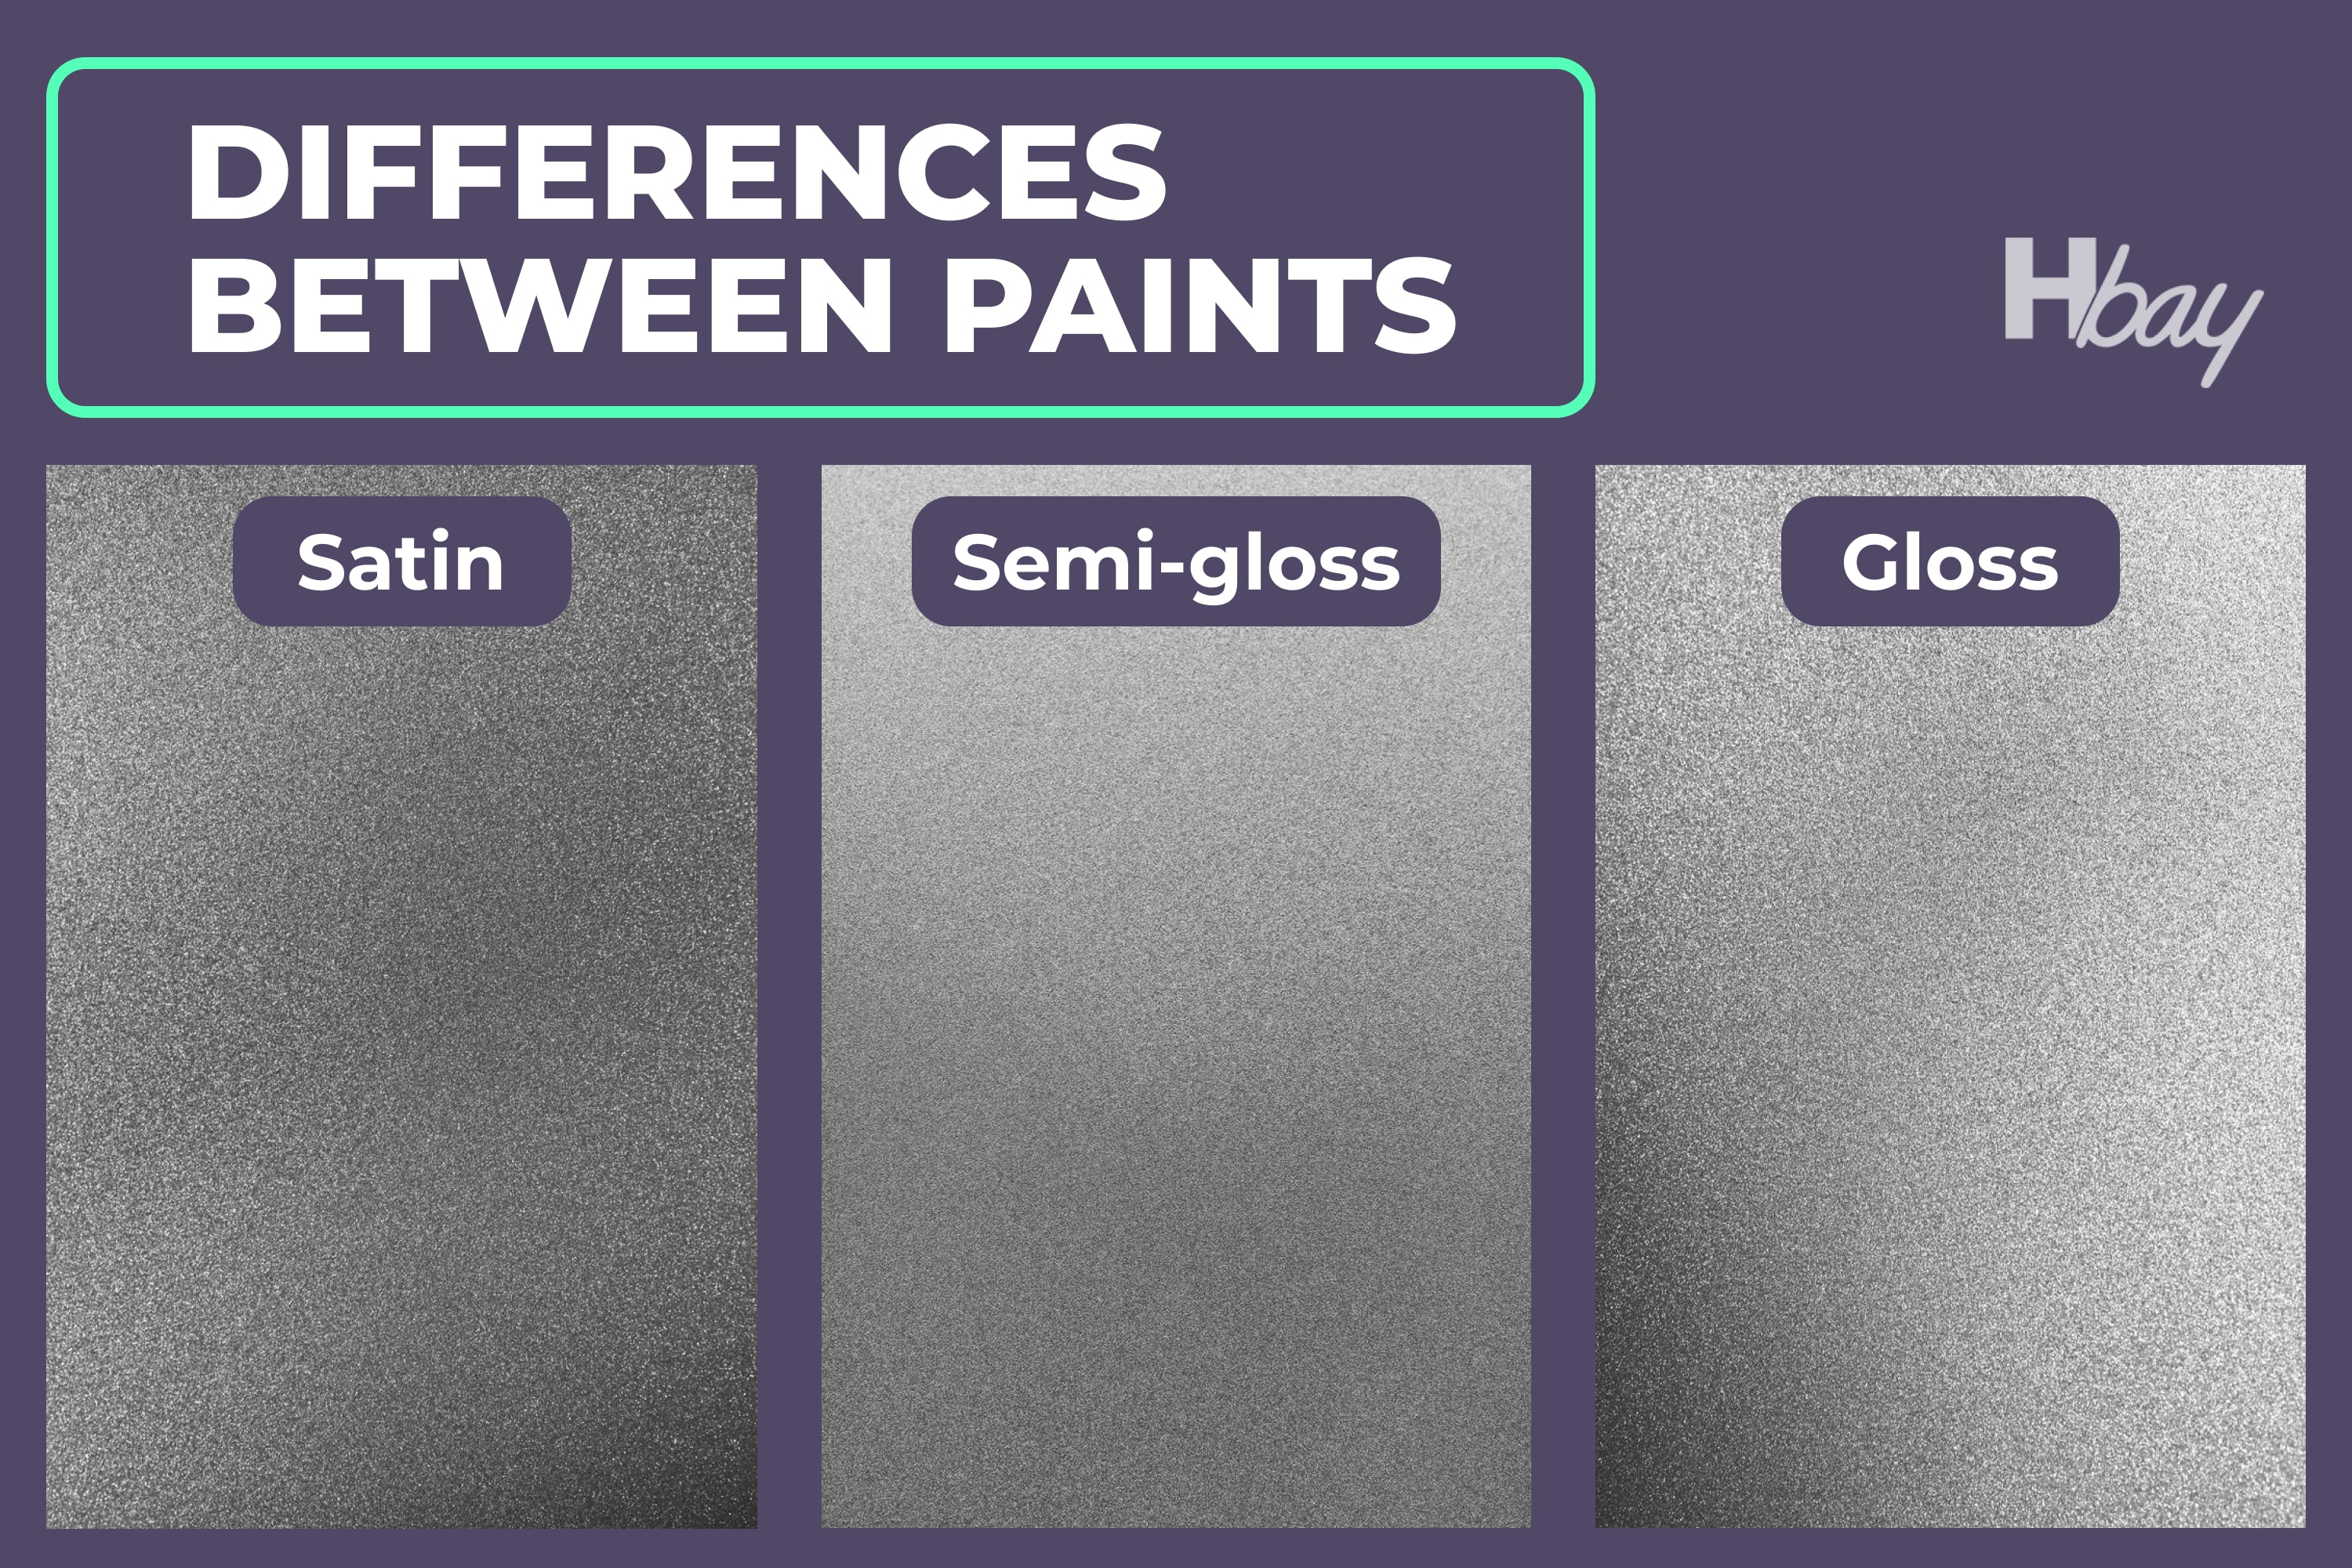 Differences between paints